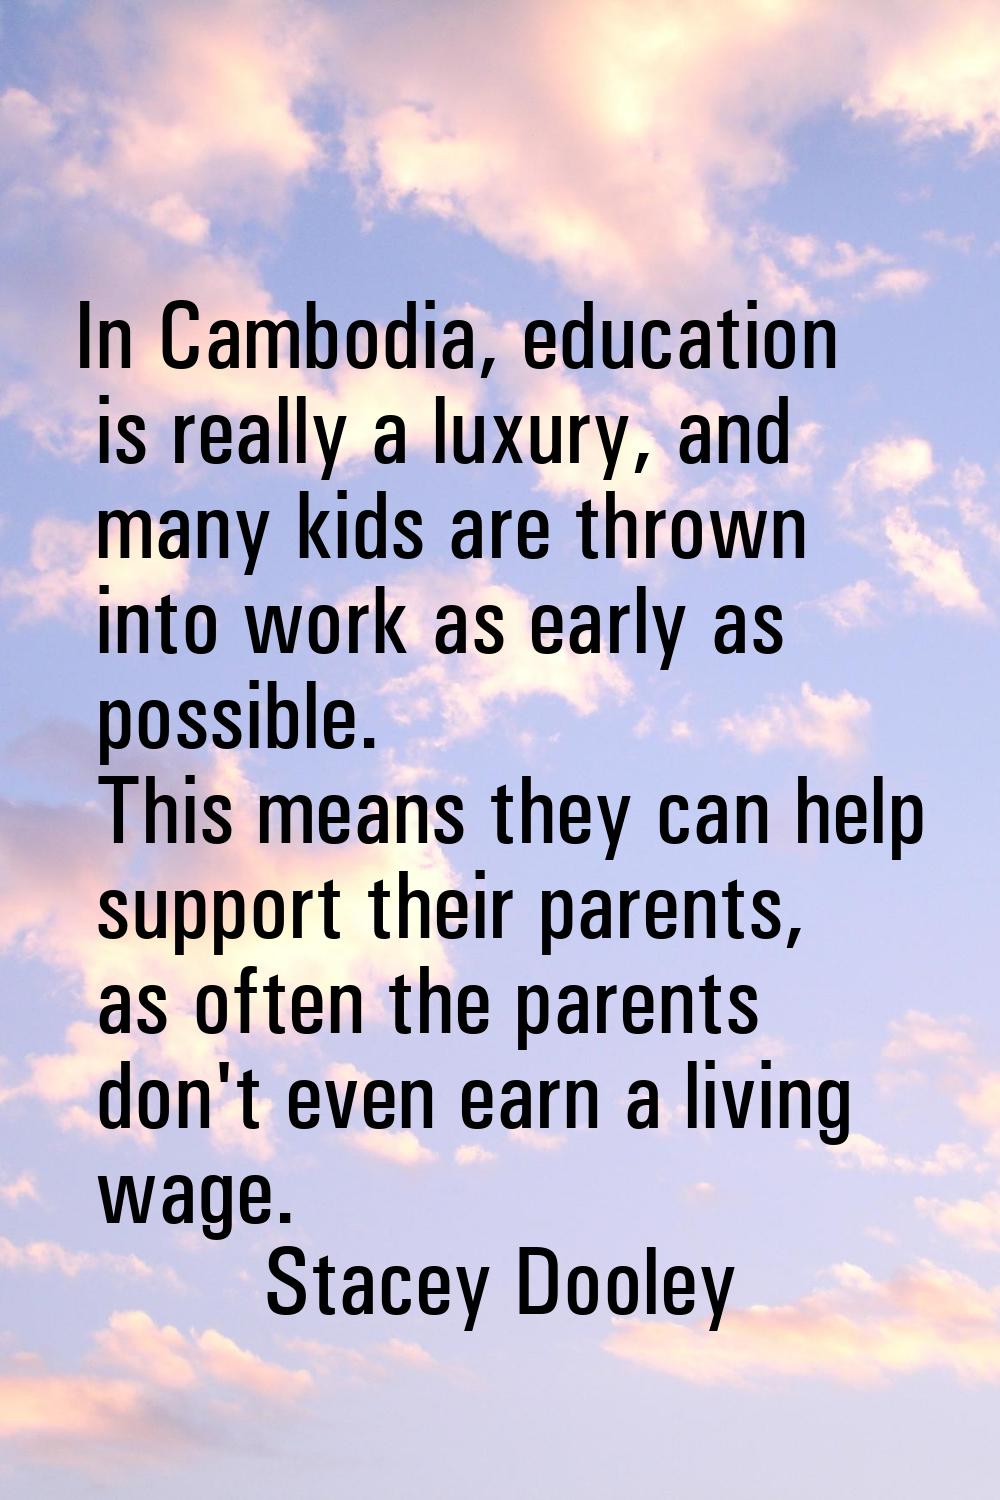 In Cambodia, education is really a luxury, and many kids are thrown into work as early as possible.